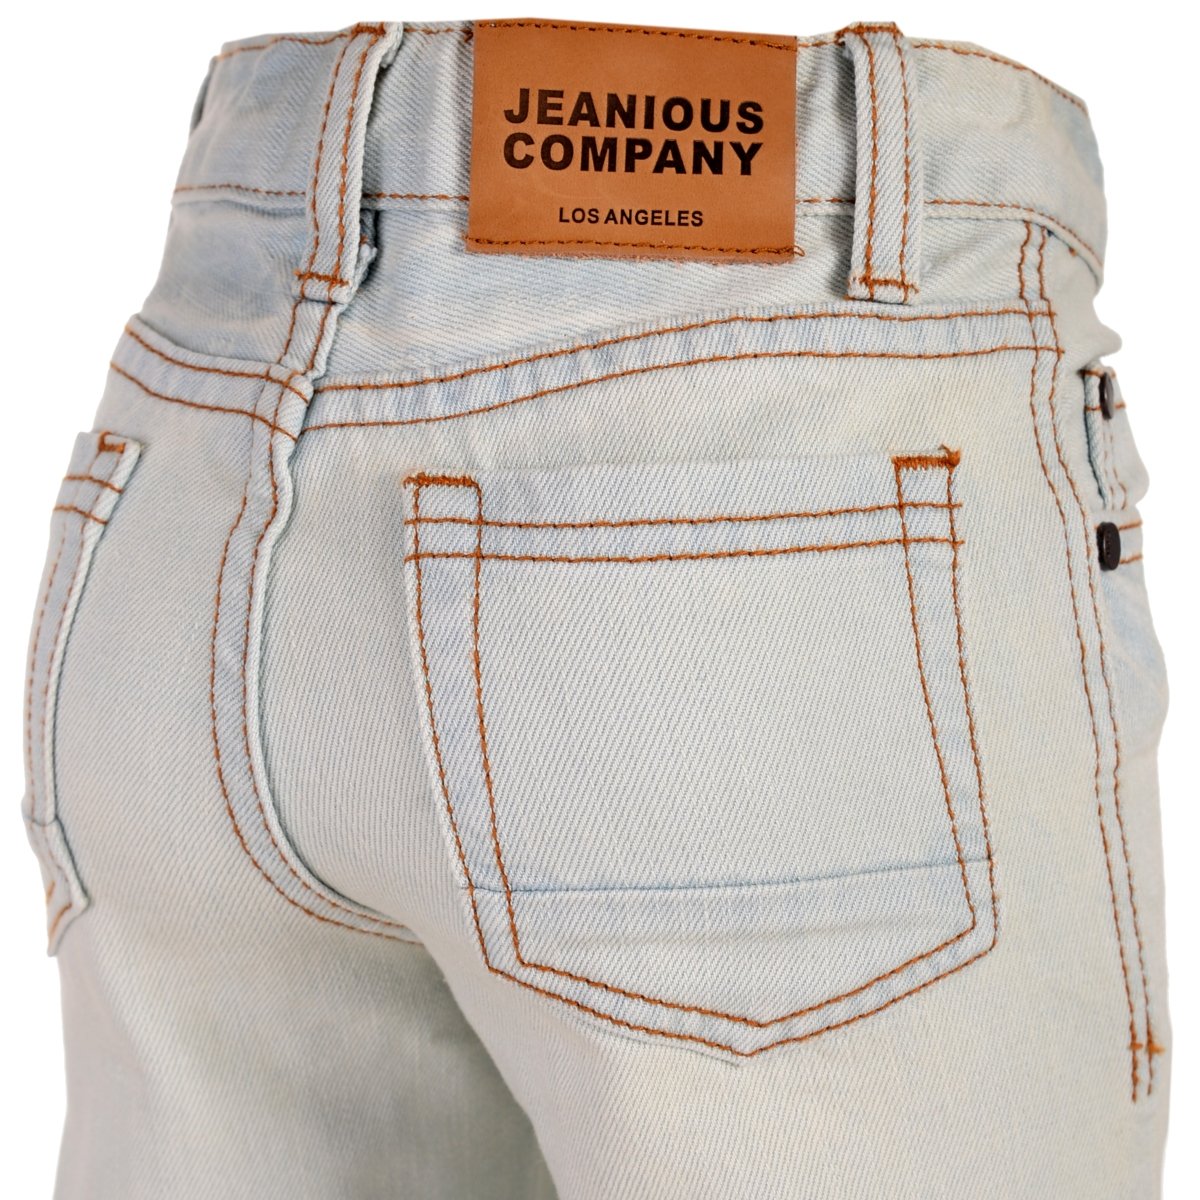 Jeans Blanked Jeanious Boys